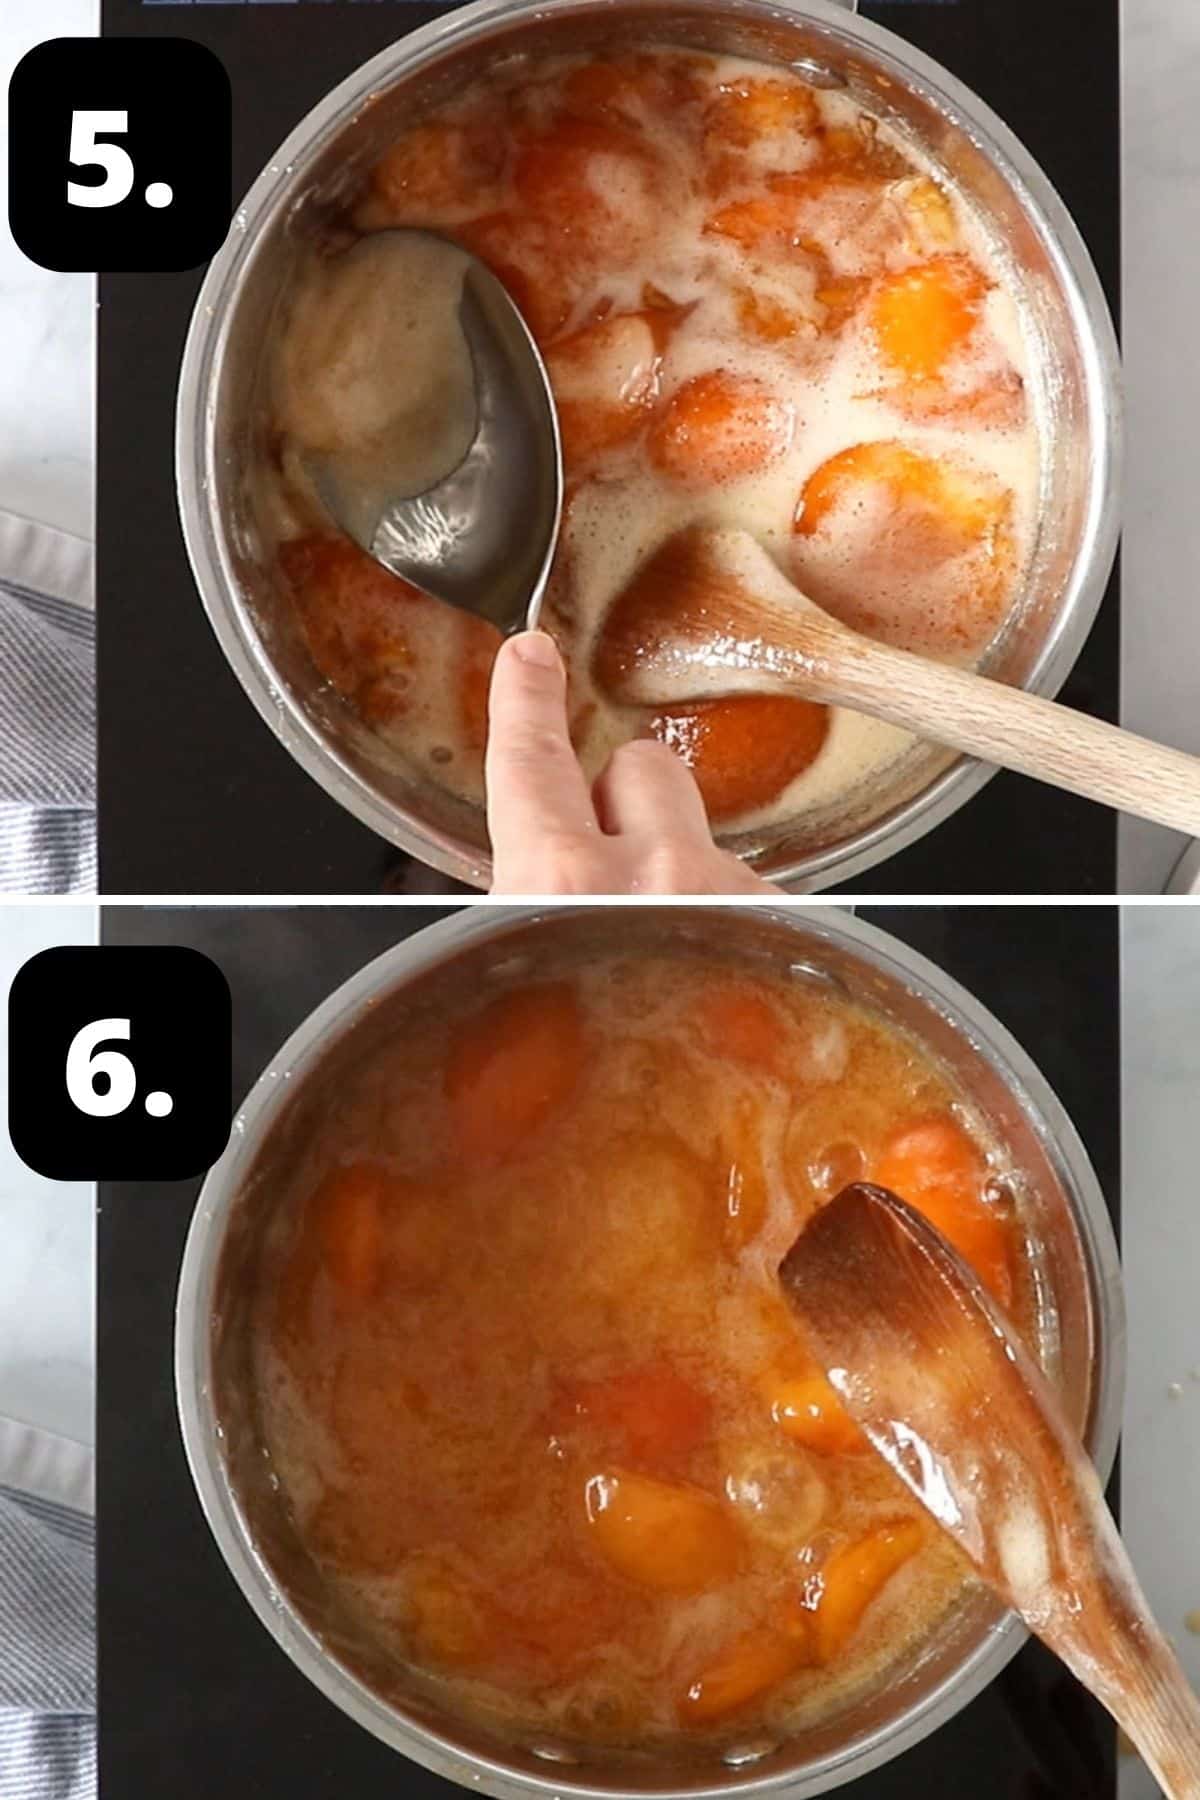 Steps 5-6 of preparing this recipe - skimming any foam from the jam and the fruit cooking.